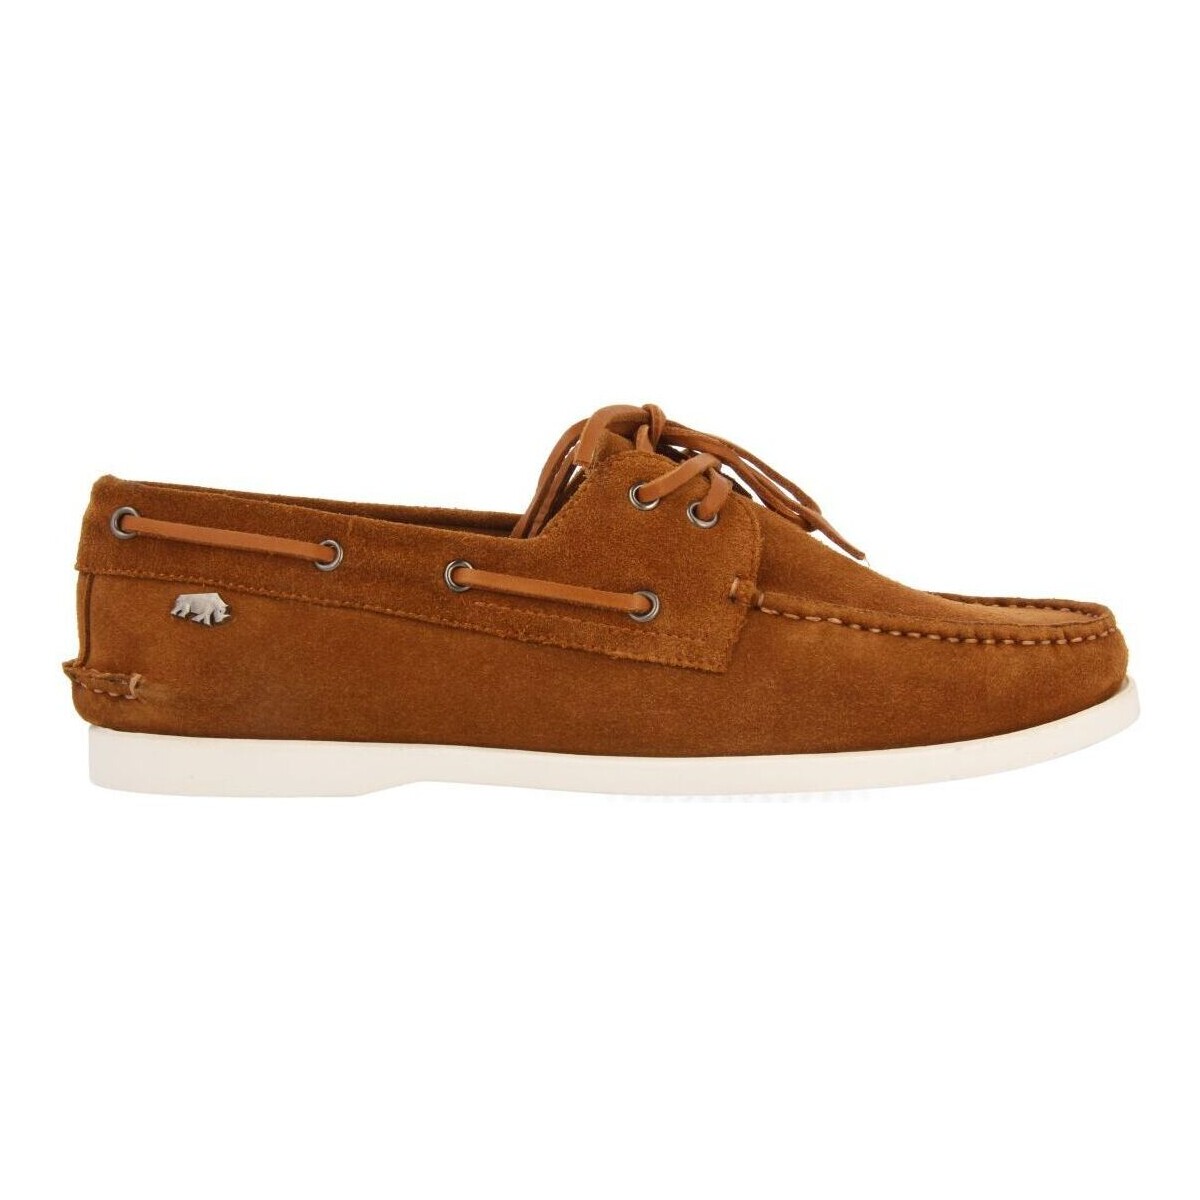 Chaussures Homme Mocassins Gioseppo TRUNO Marron